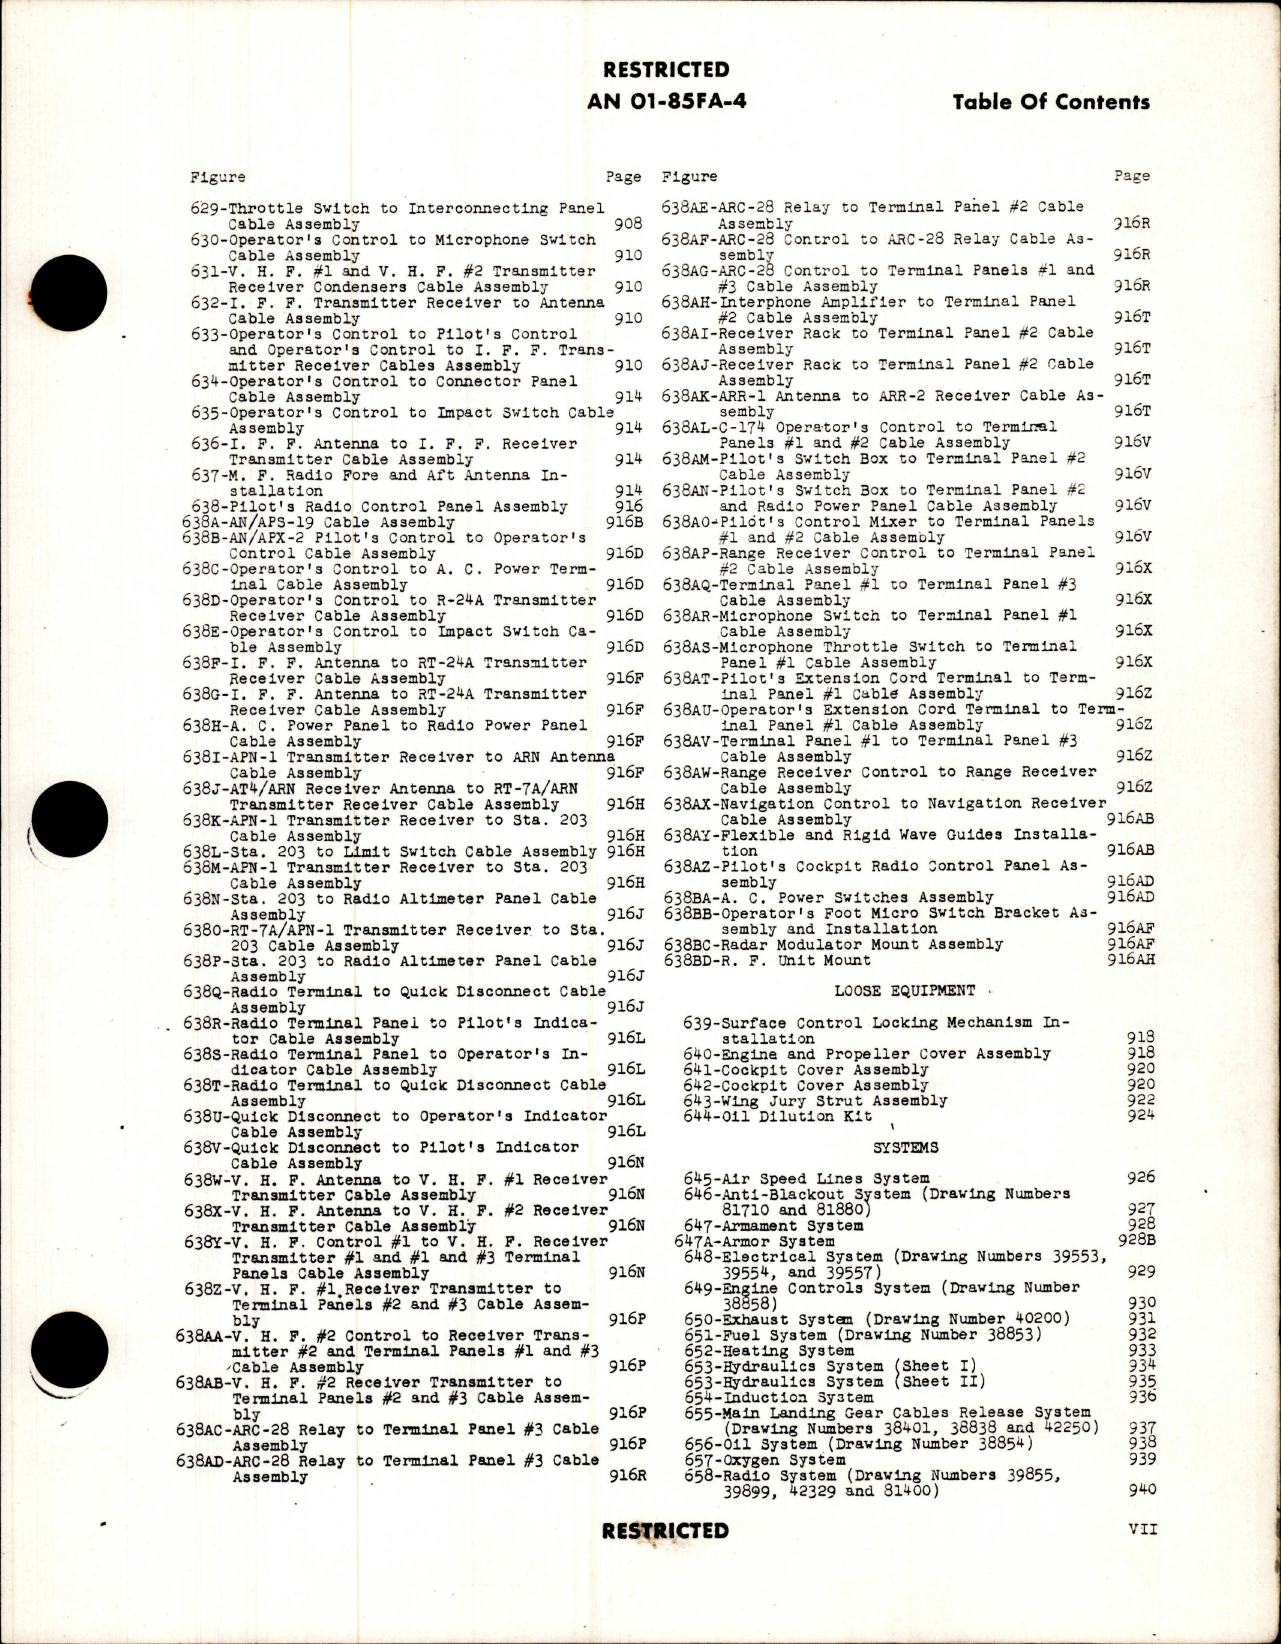 Sample page 9 from AirCorps Library document: Parts Catalog for F7F-1N, F7F-2N, F7F-3, F7F-3N, and F7F-4N